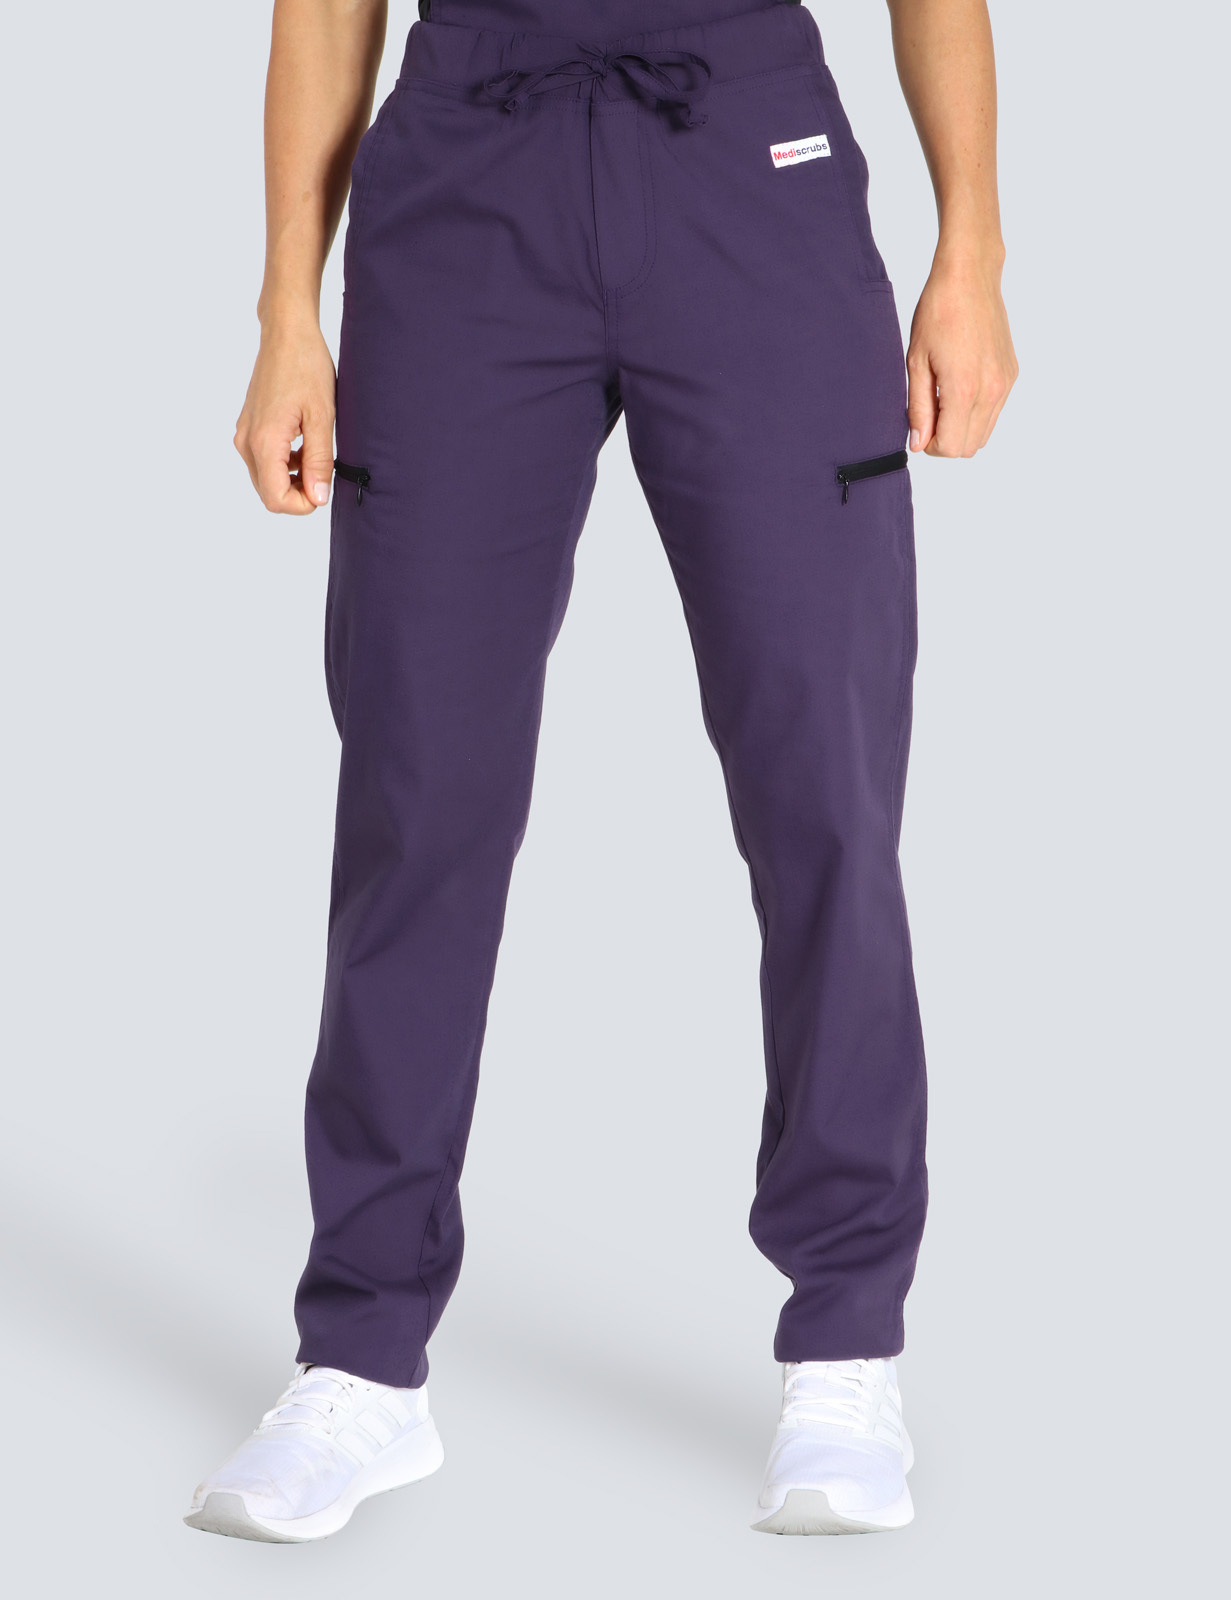 Southwest Healthcare - Utility Pants in Aubergine